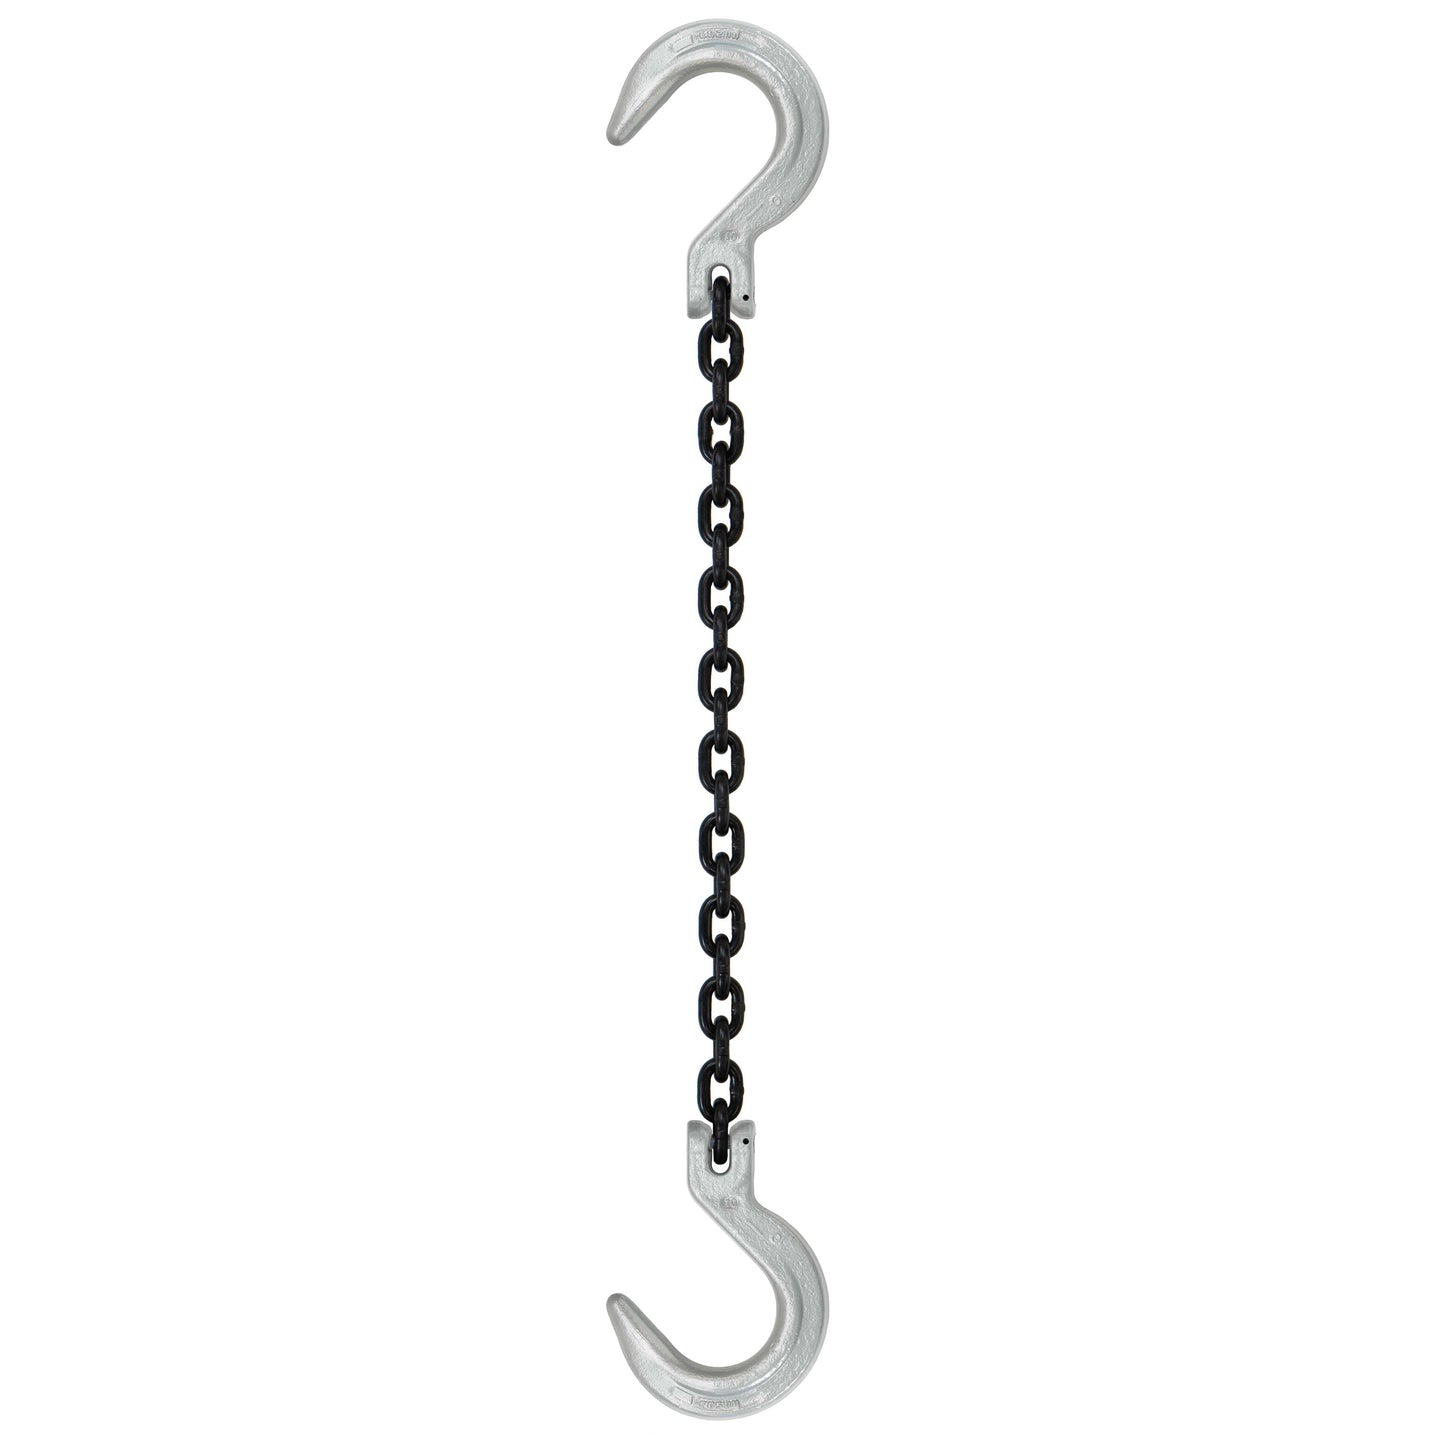 38 inch x 8 foot Domestic Single Leg Chain Sling w Crosby Foundry & Foundry Hooks Grade 100 image 1 of 2